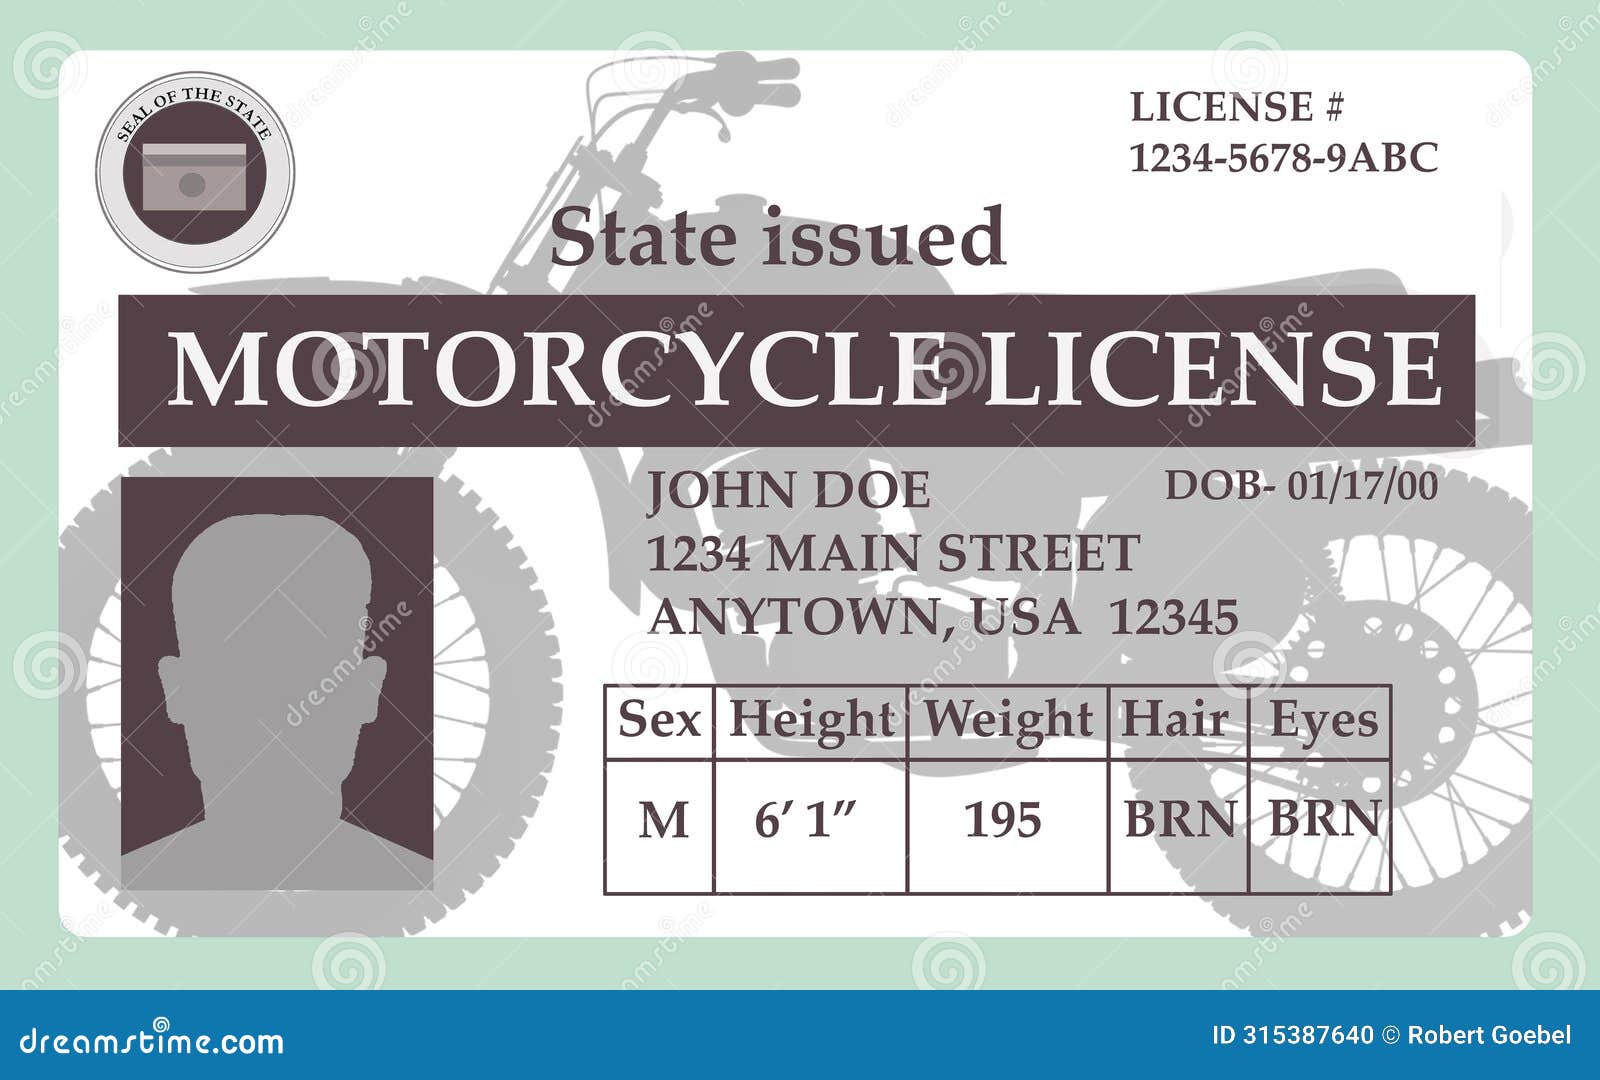 a mock, generic state issued motorcycle license for bike riders in seen  on the background